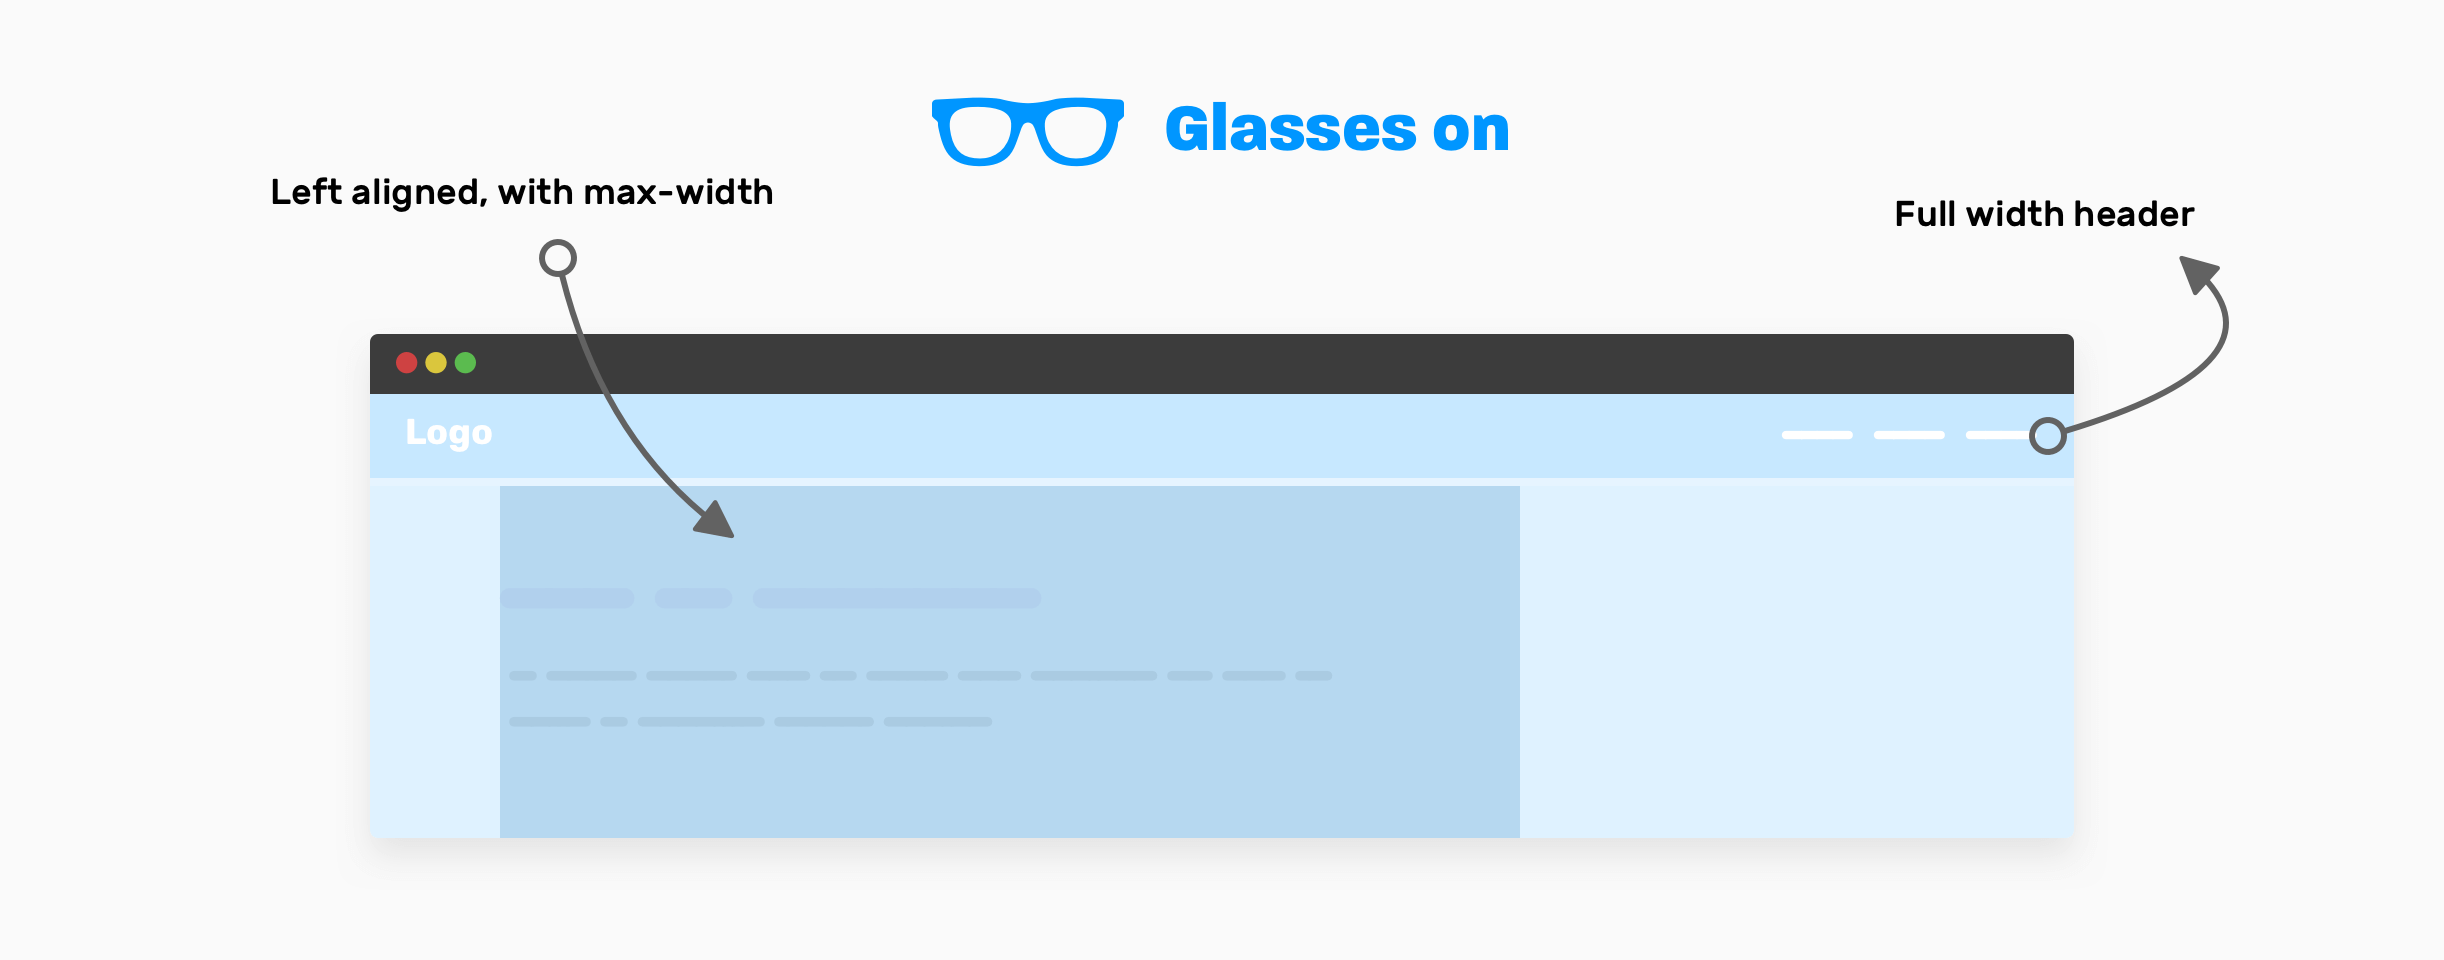 example-2-1-w-glasses.png